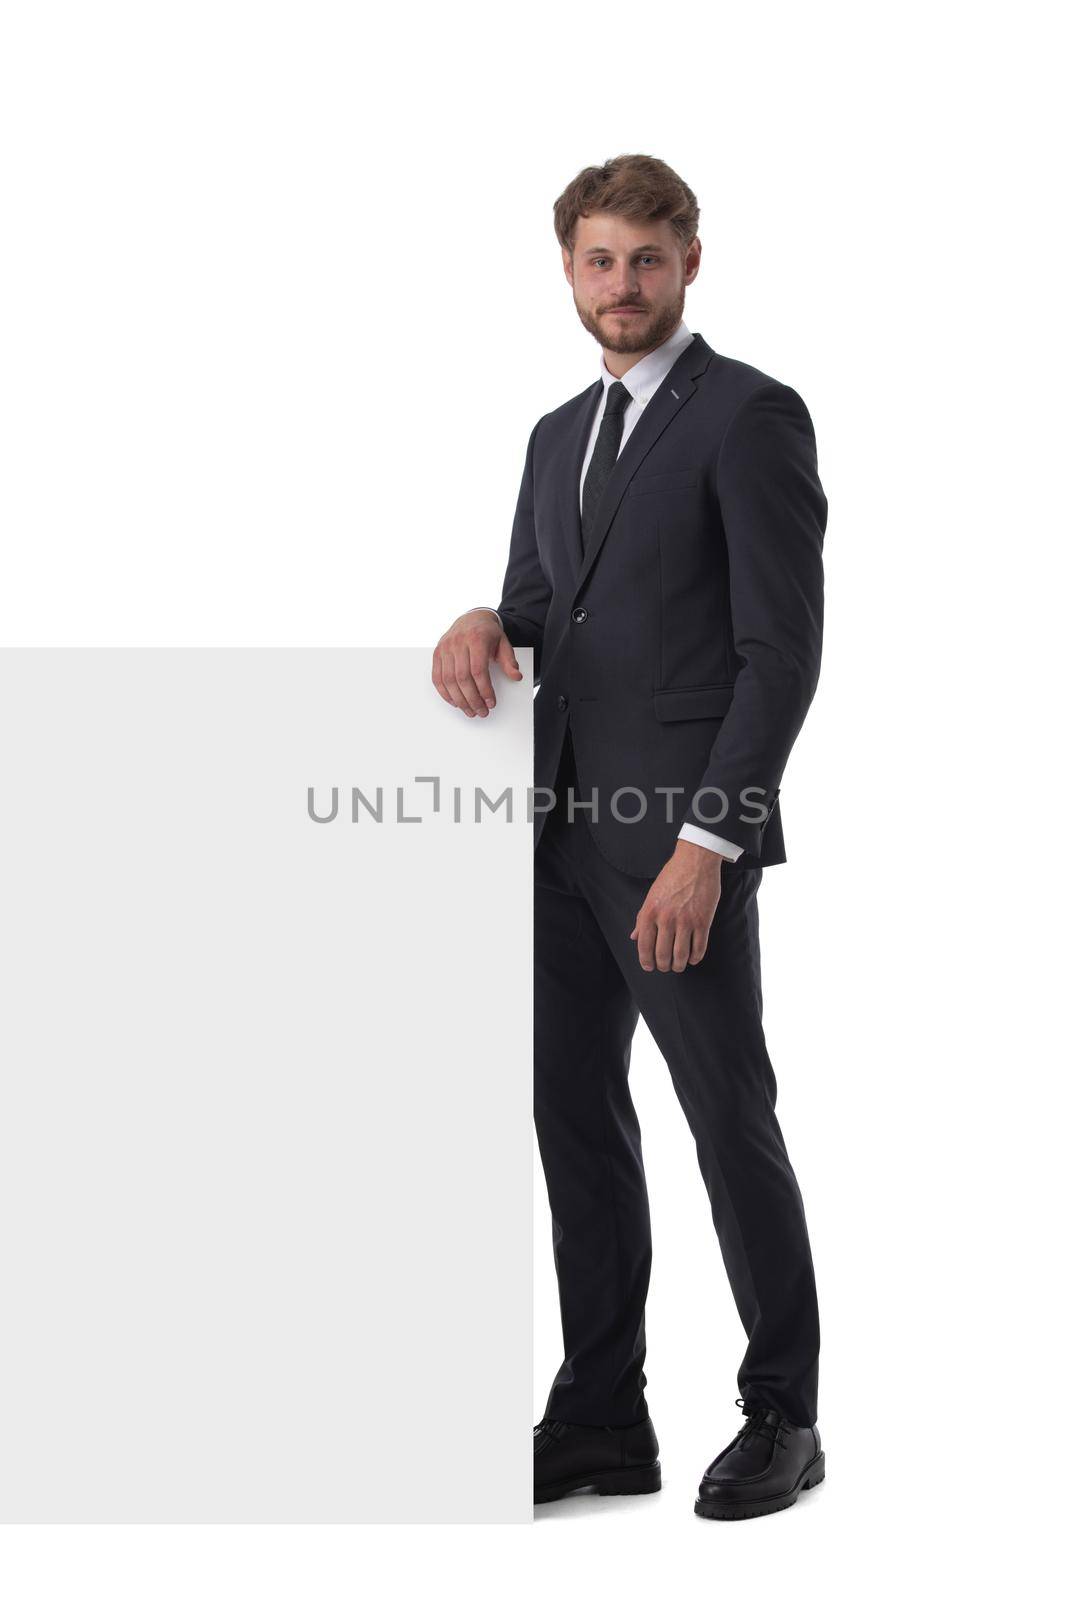 Business man in suit with banner by ALotOfPeople